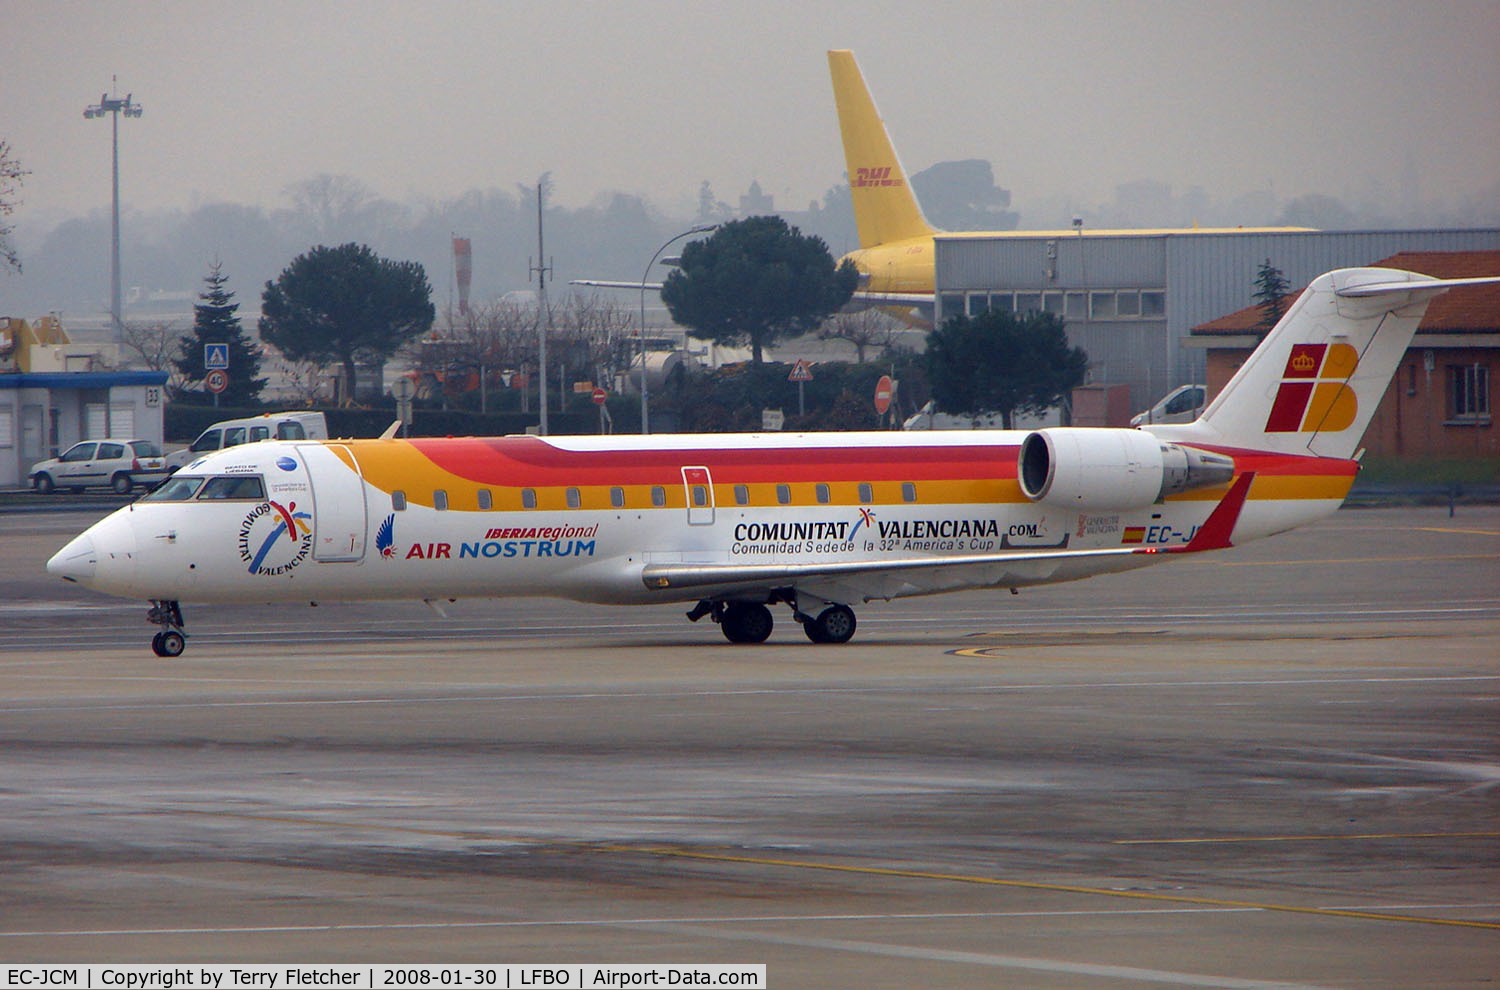 EC-JCM, 2004 Bombardier CRJ-200ER (CL-600-2B19) C/N 7981, Air Nostrum  CLRJ taxies in at Toulouse in January 2008